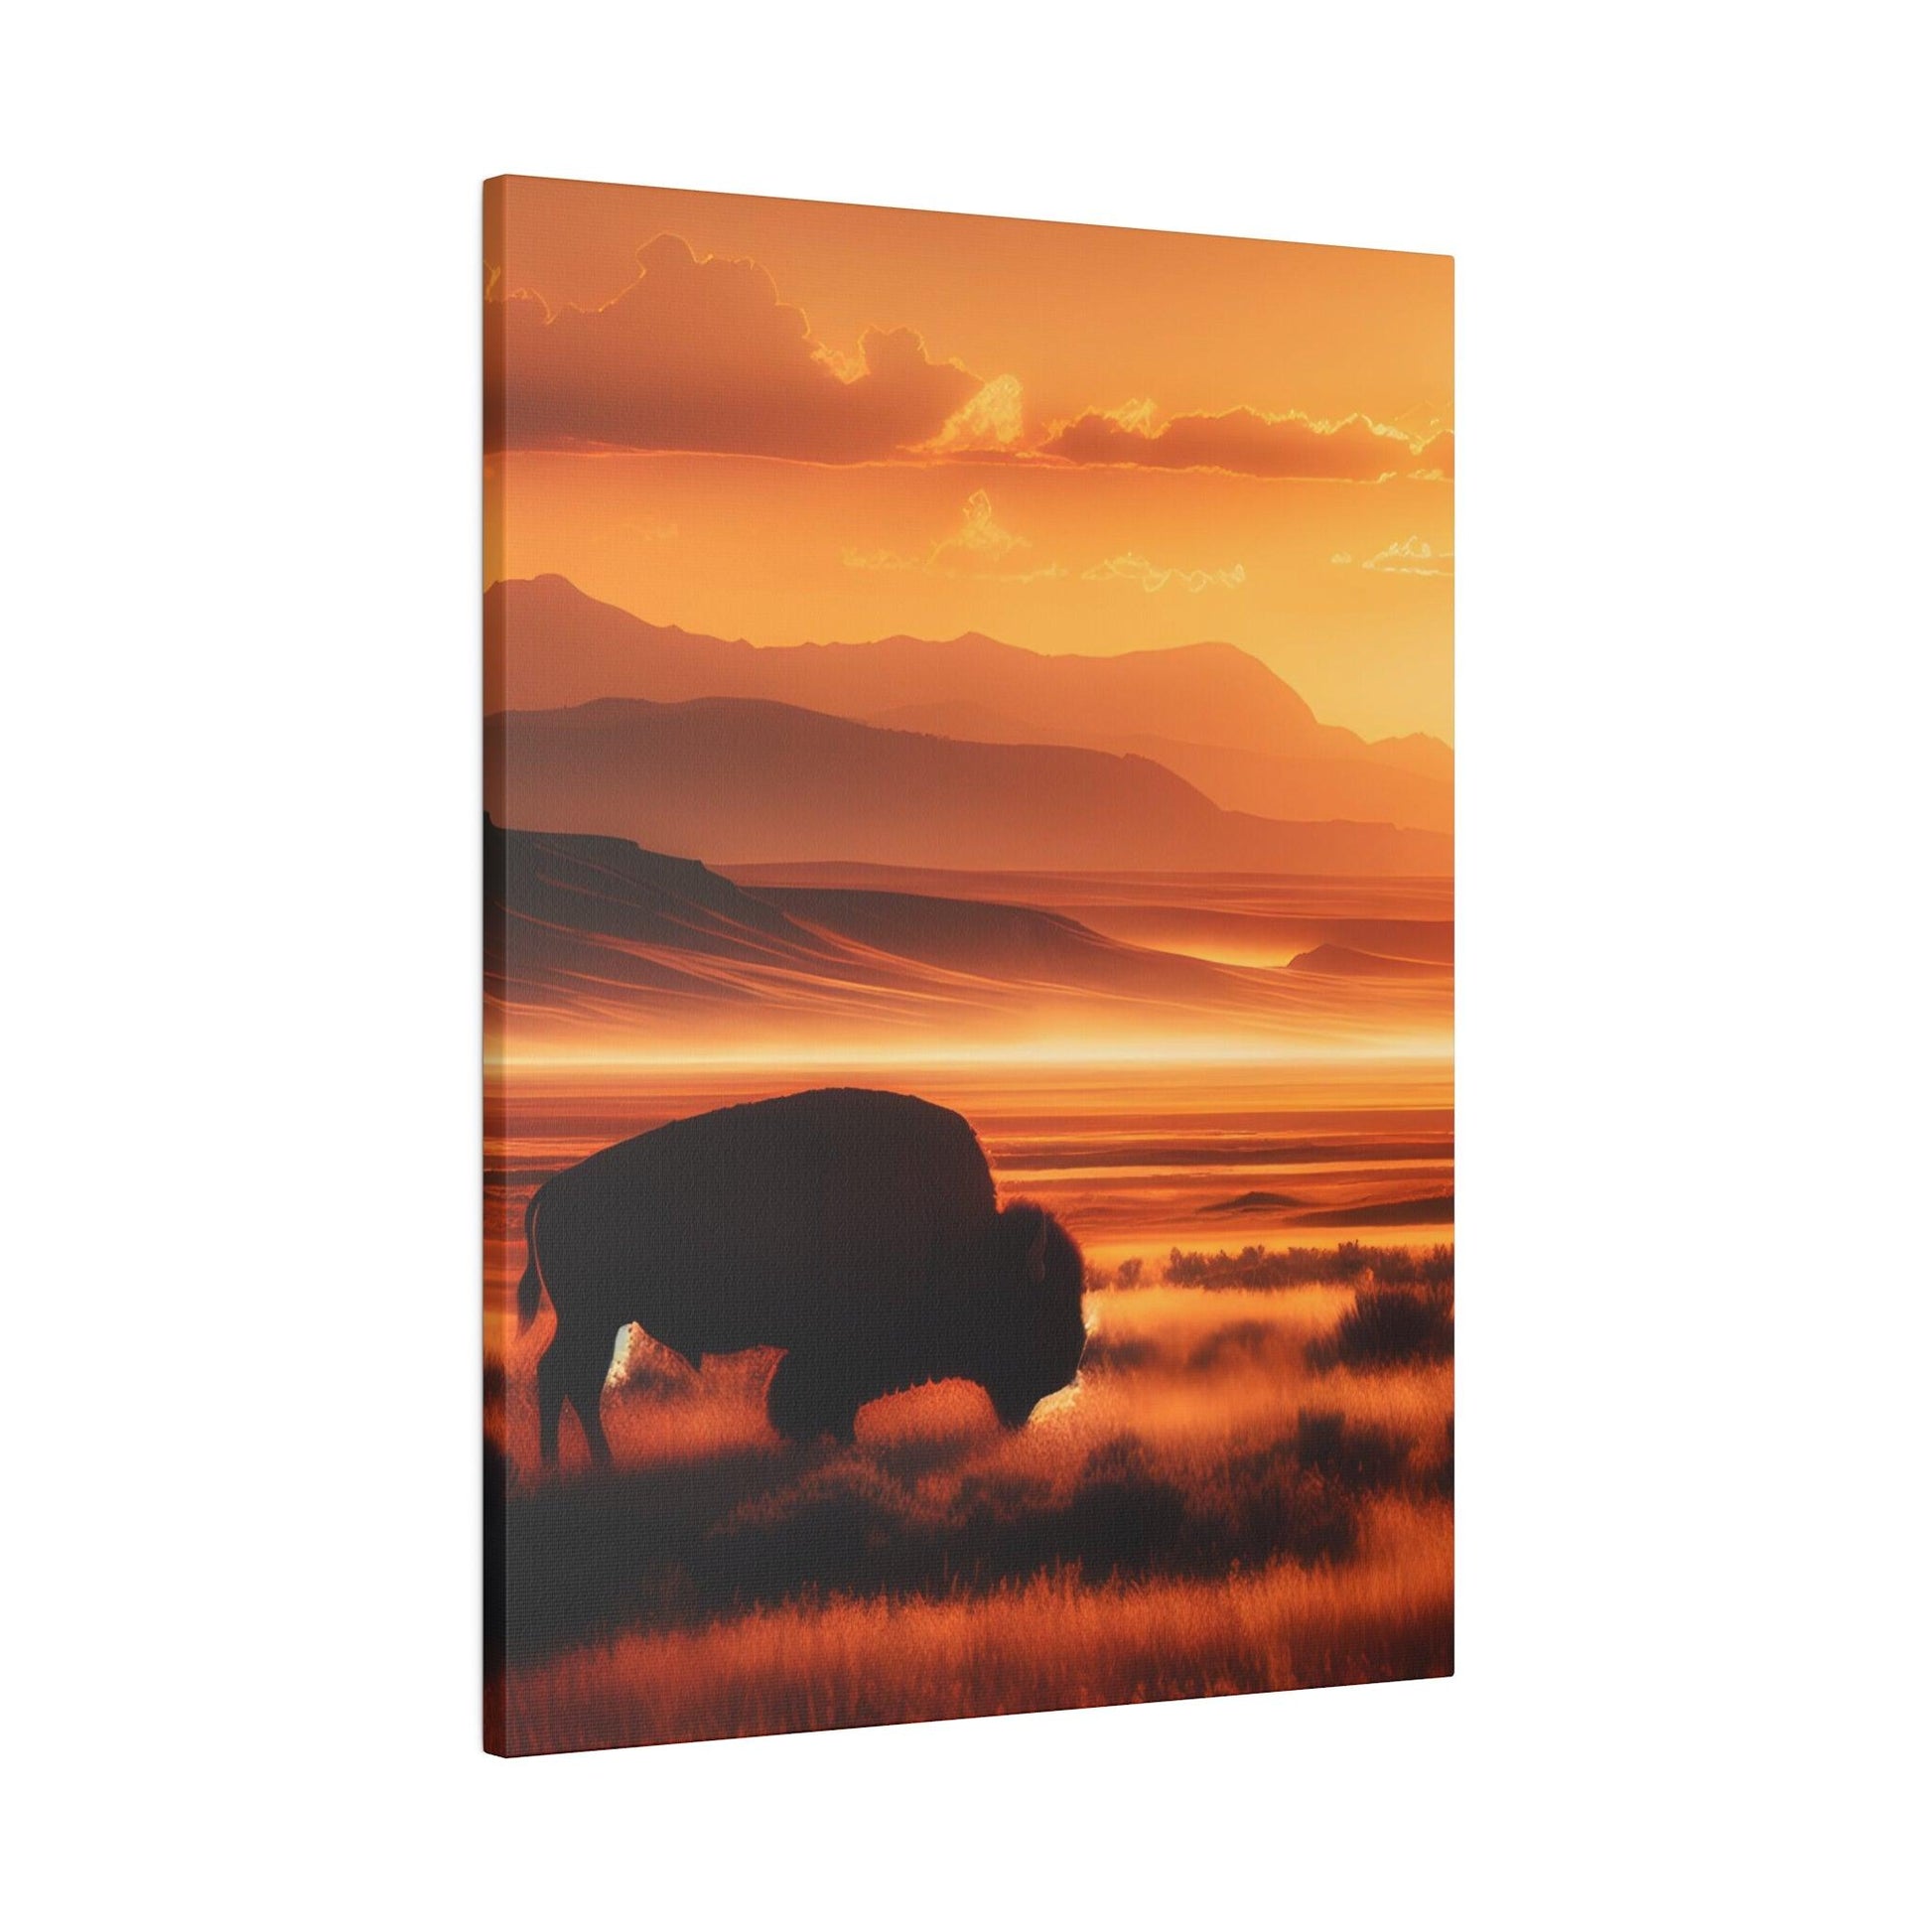 "Buffalo Majesty: A Homage to Wilderness" - The Alice Gallery